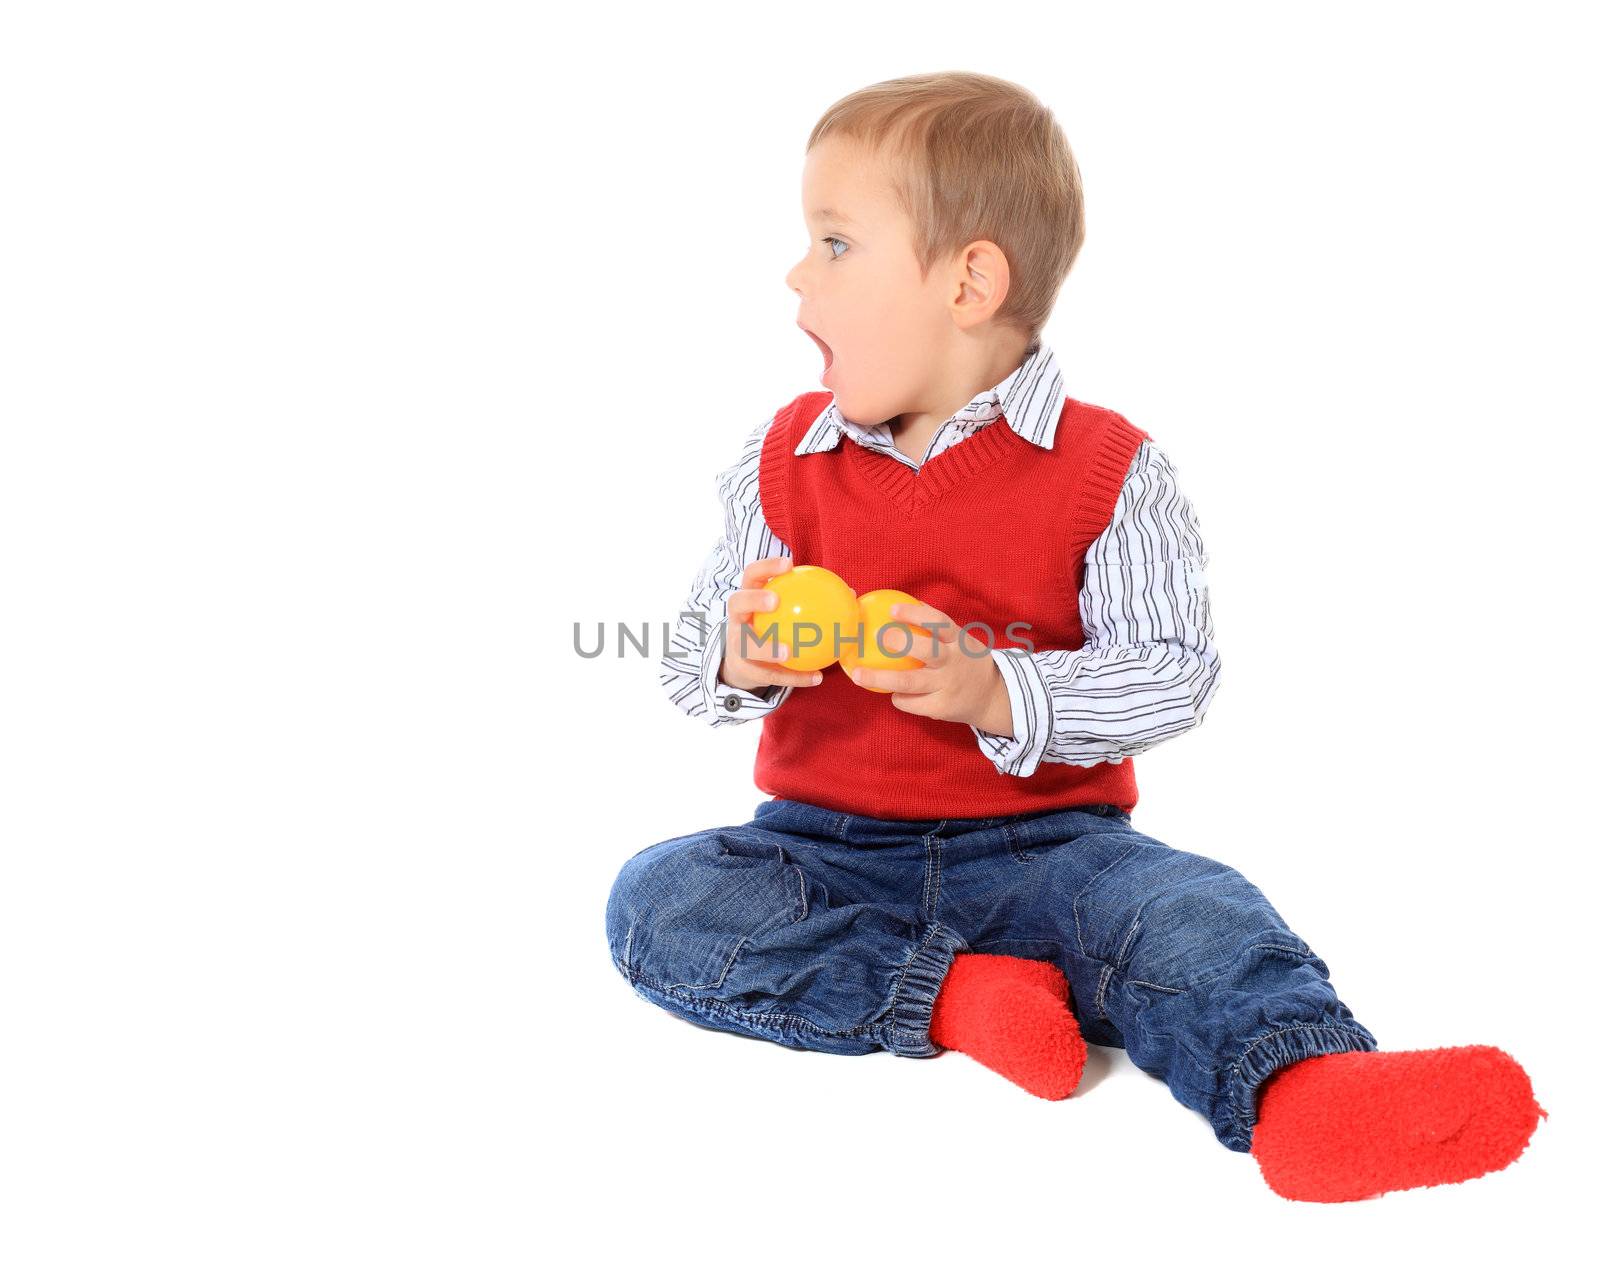 Cute caucasian toddler looking to the side. All on white background.